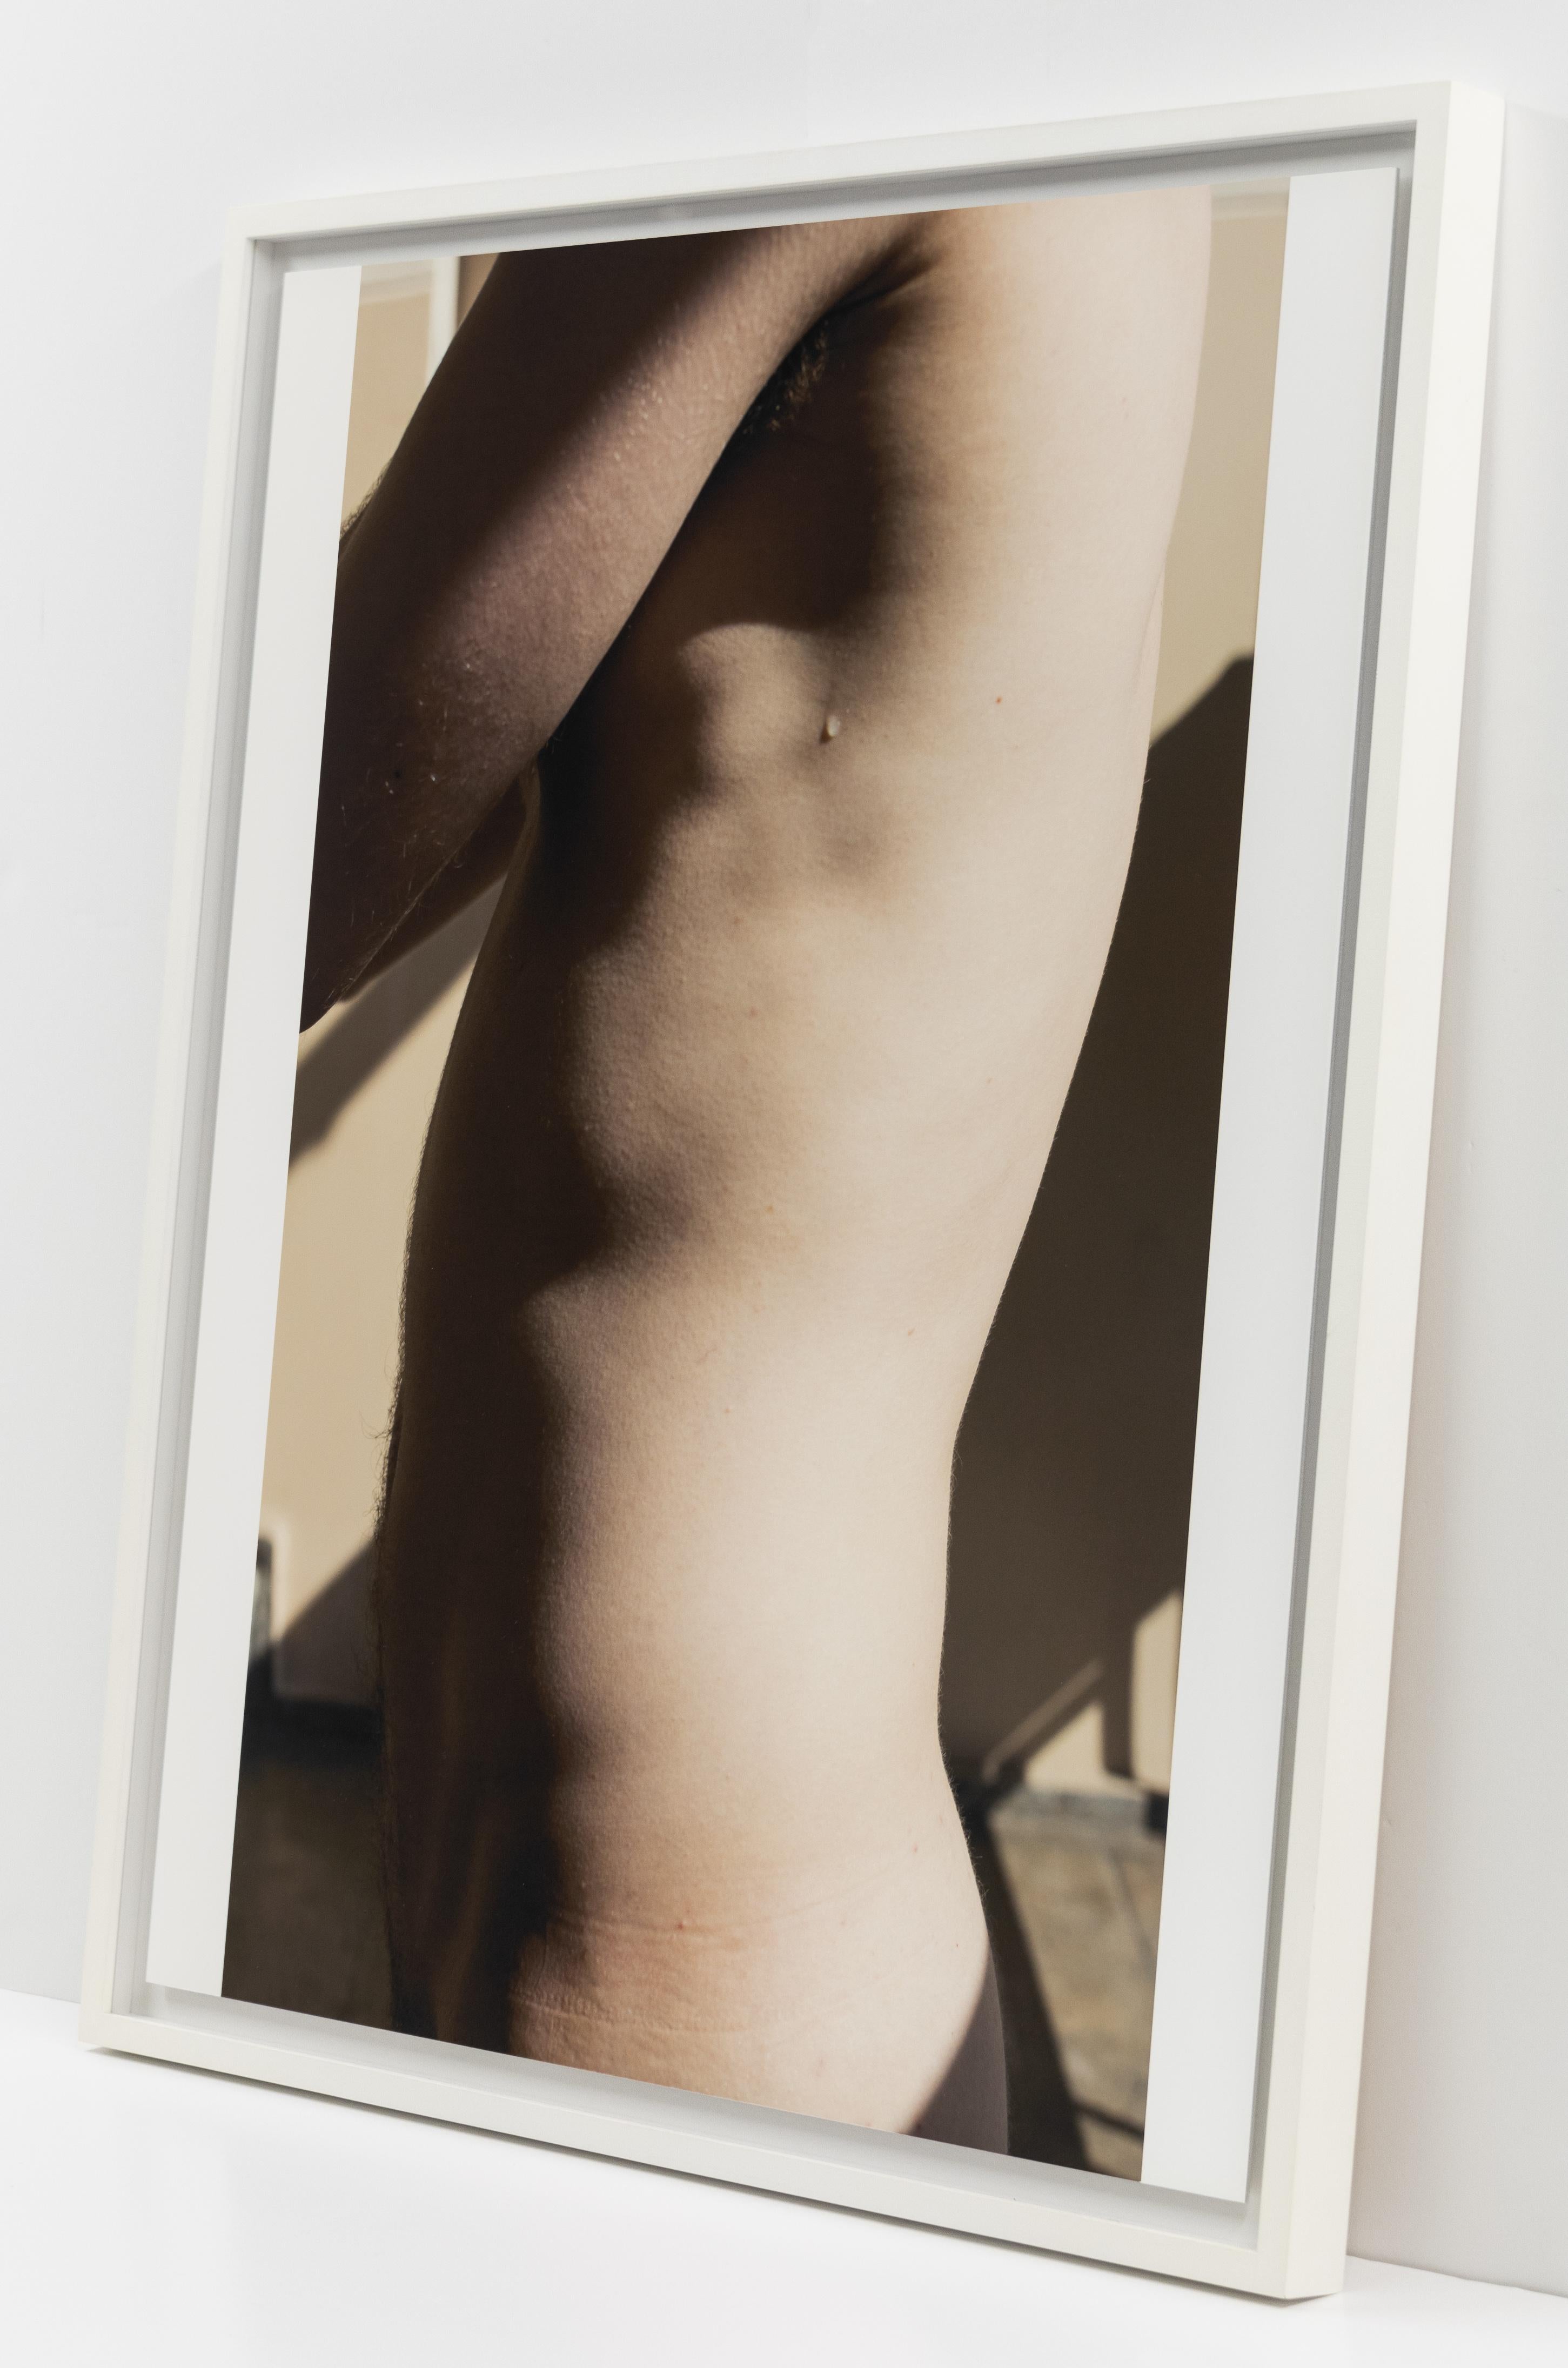 This work by Wolfgang Tillmans is offered by CLAMP in New York City.

Signed, titled, numbered, and dated, verso

Archival pigment print mounted to aluminum in artist’s frame (Edition of 3)